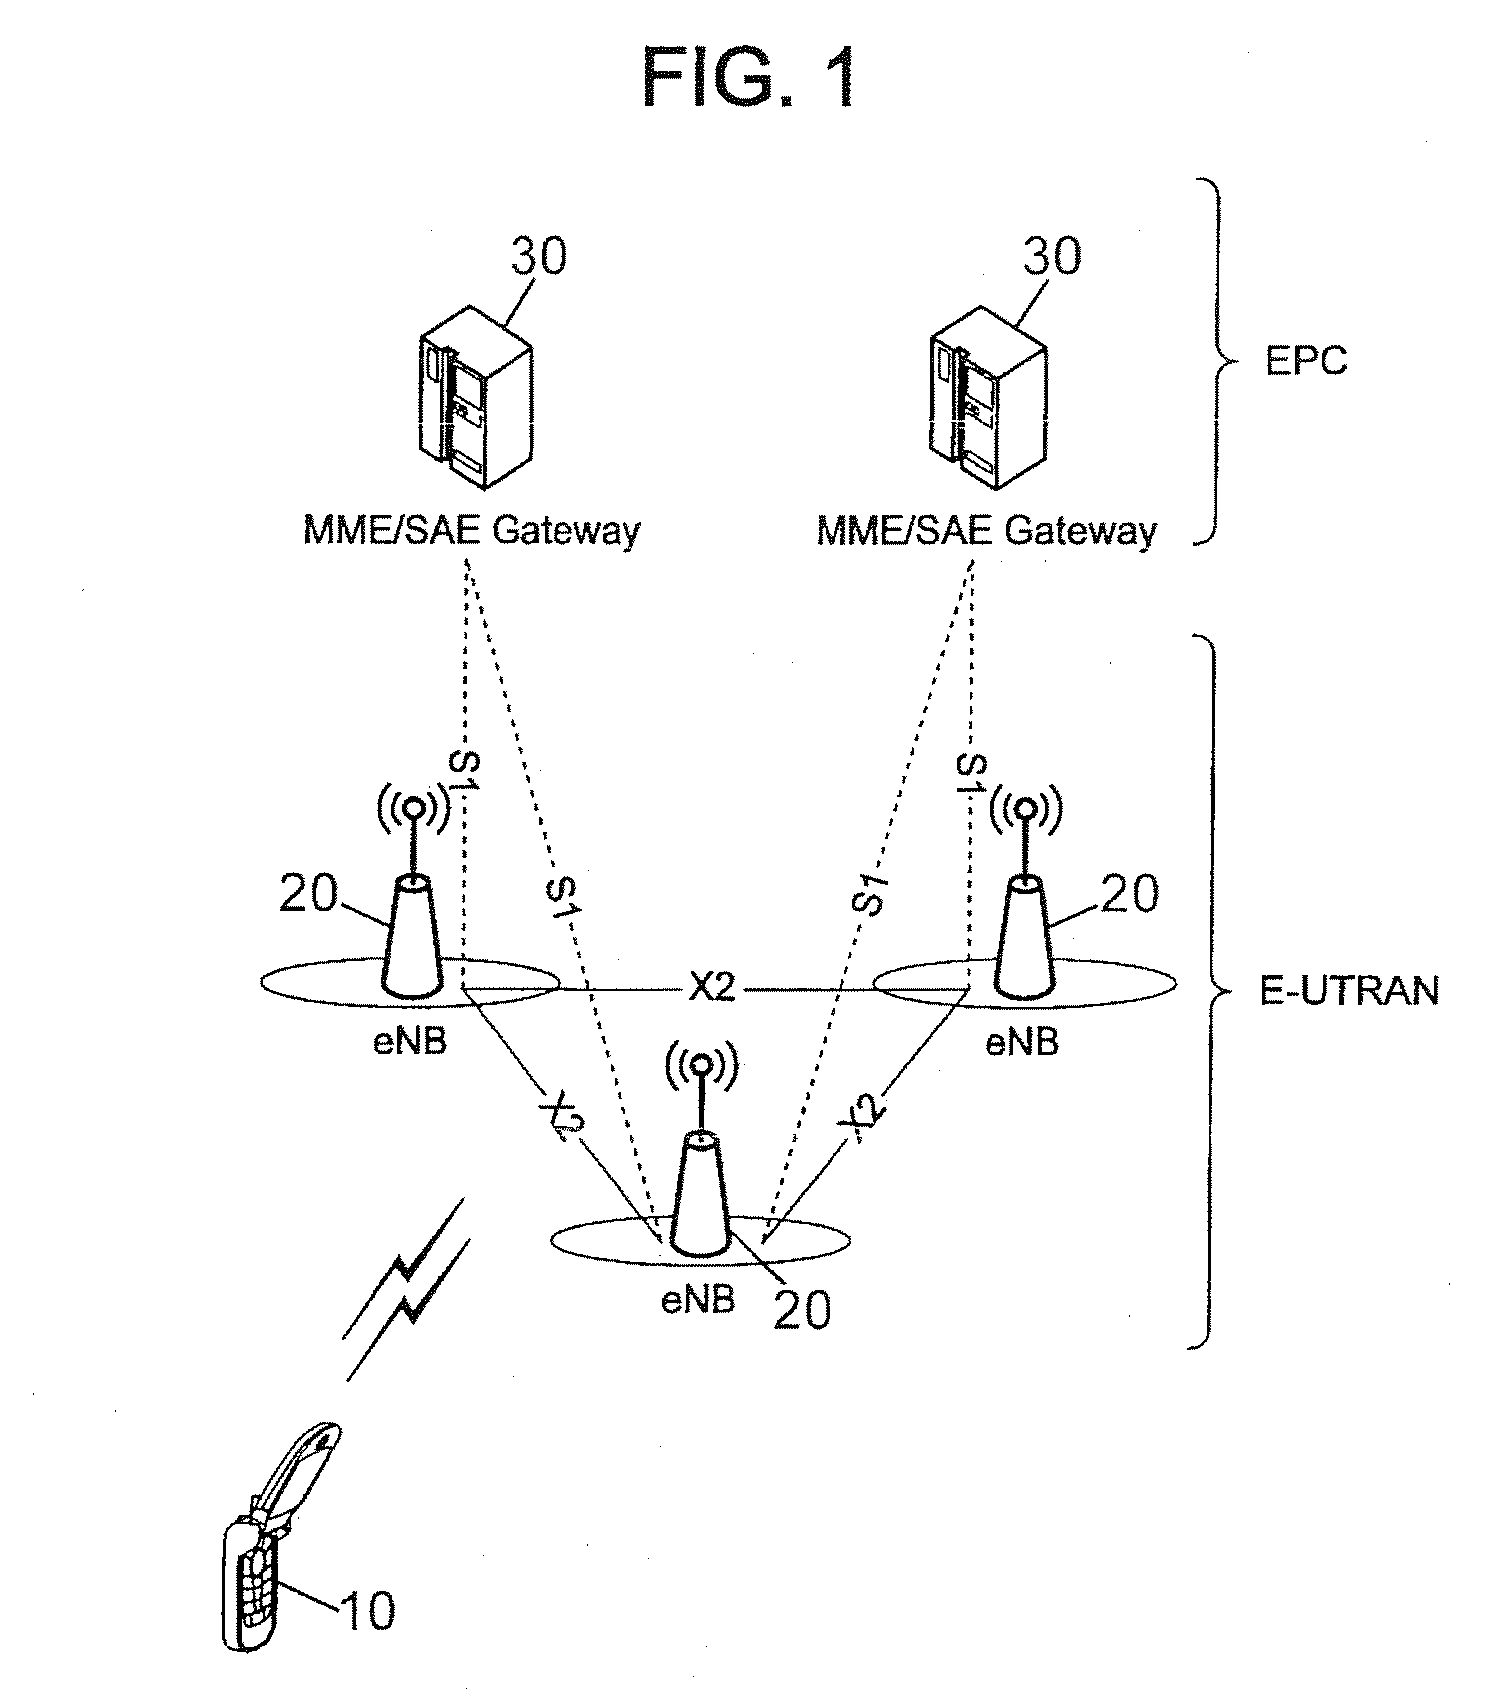 Wireless communication method for transmitting a sequence of data units between a wireless device and a network